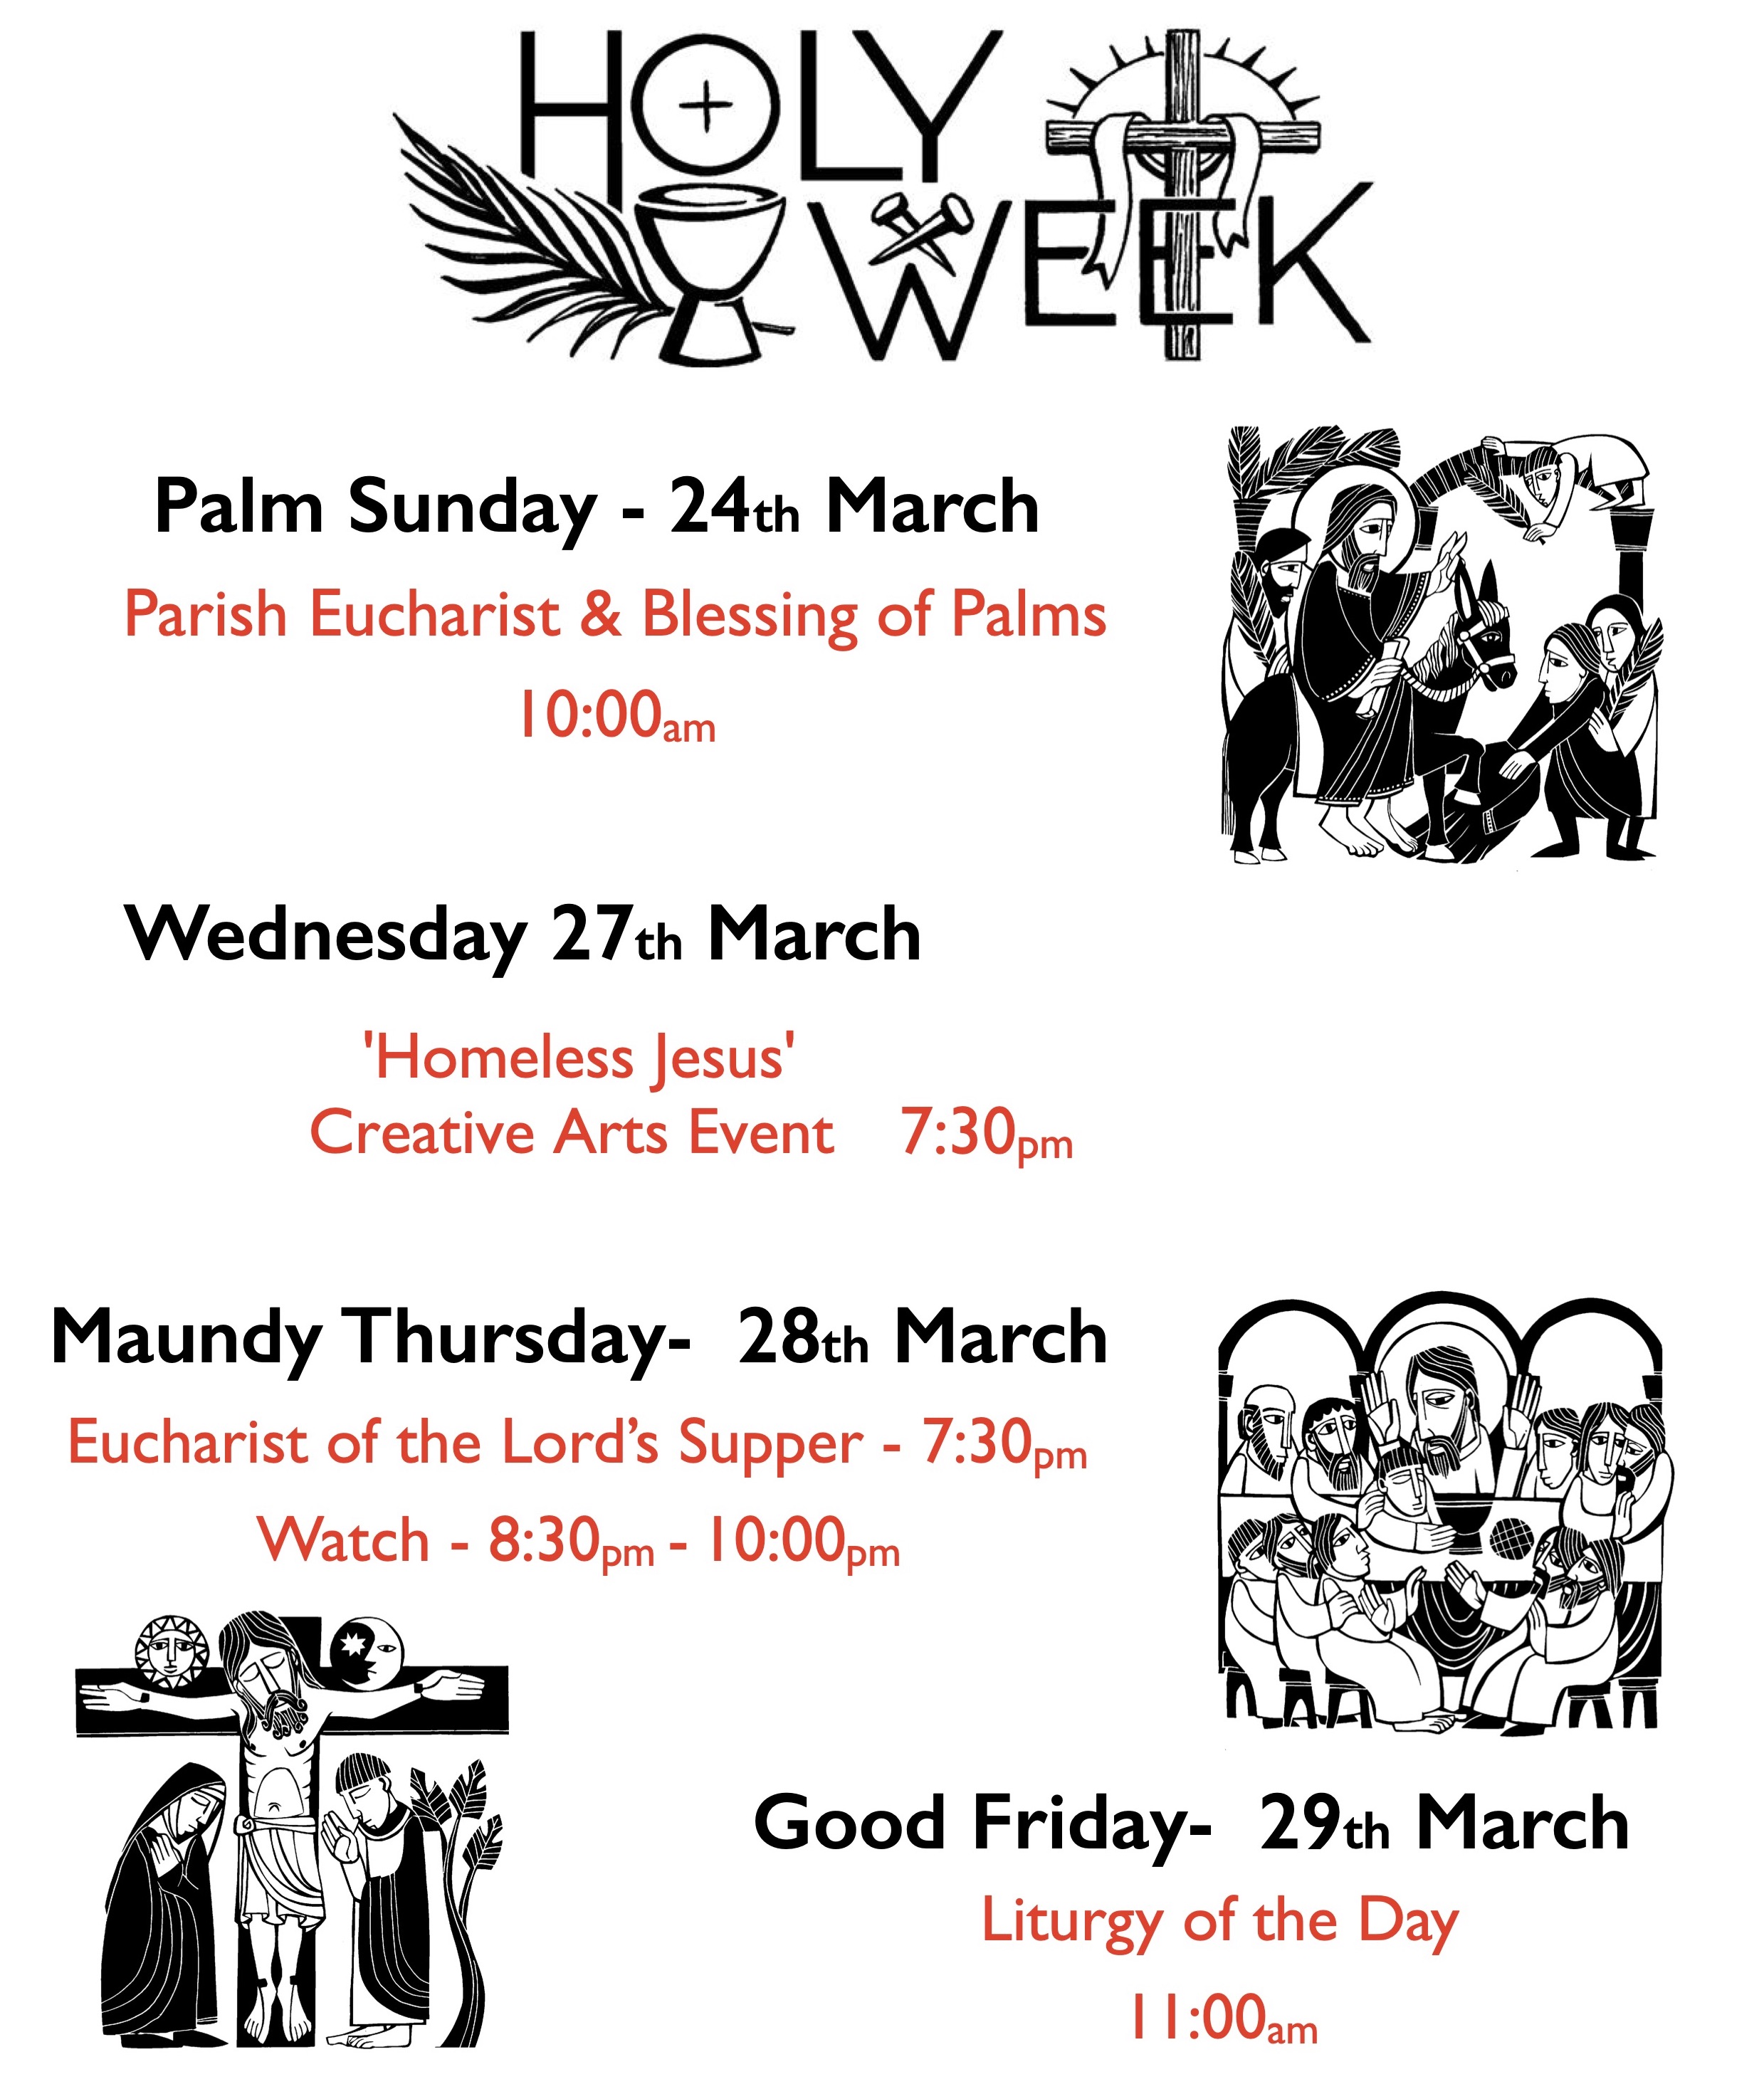 Holy Week Poster: Palm Sunday 24th March Parish Eucharist & Blessing of Palms 10:00am; Wednesday 27th Match, 'Homeless Jesus' Creative Arts Event, 7.30pm; Maundy Thursday, 28th March, Eucharist of the Lord's Supper, 7.30pm, Watch 8:30pm-10:00pm; Good Friday, 29th March; Liturgy of the Day, 11:00am